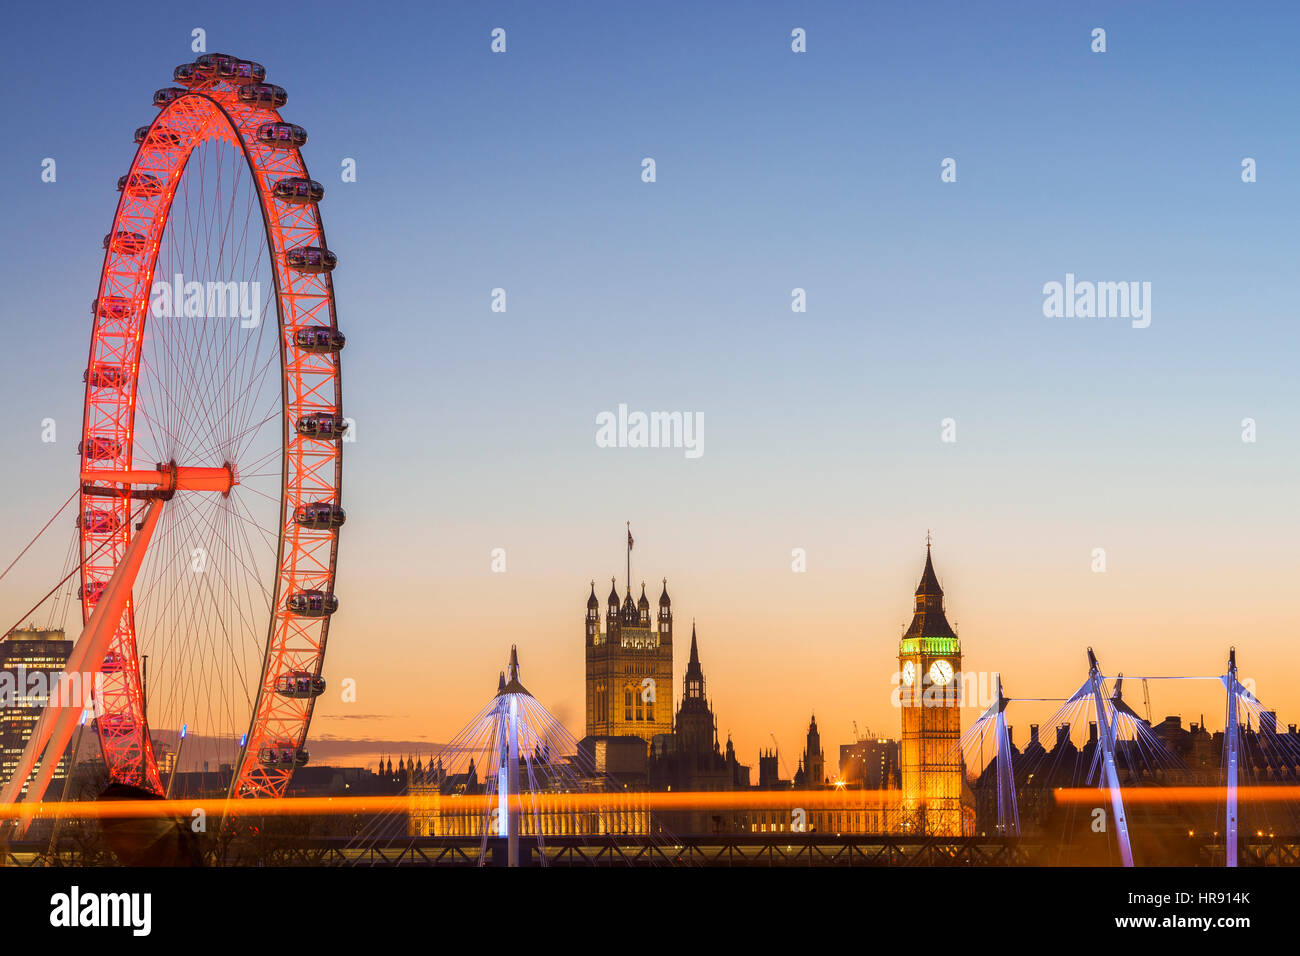 London Millennium Wheel and the Houses of Parliament illuminated at twilight with light trail, Westminster, London, UK Stock Photo